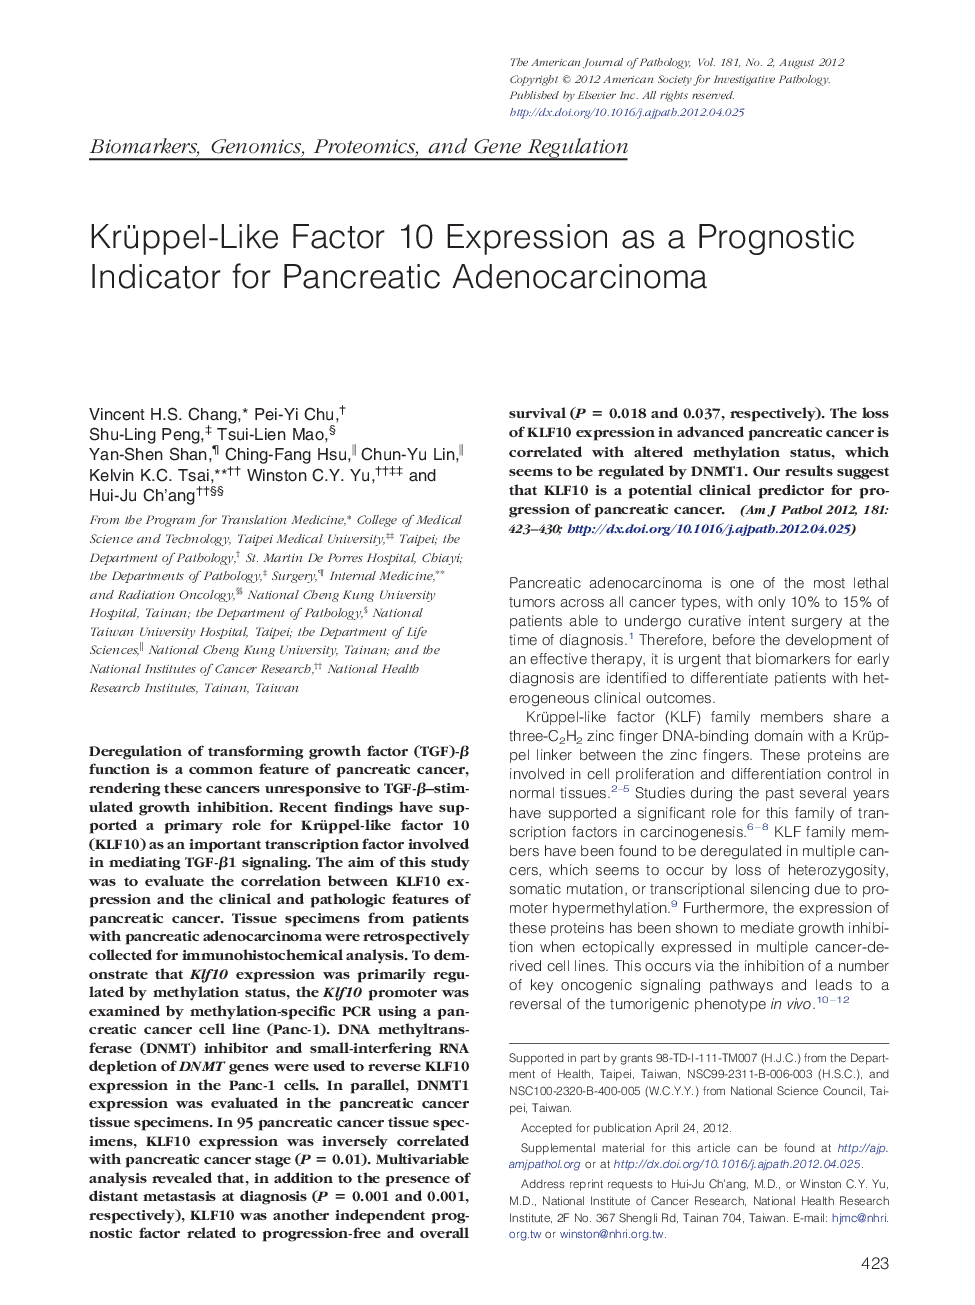 Krüppel-Like Factor 10 Expression as a Prognostic Indicator for Pancreatic Adenocarcinoma